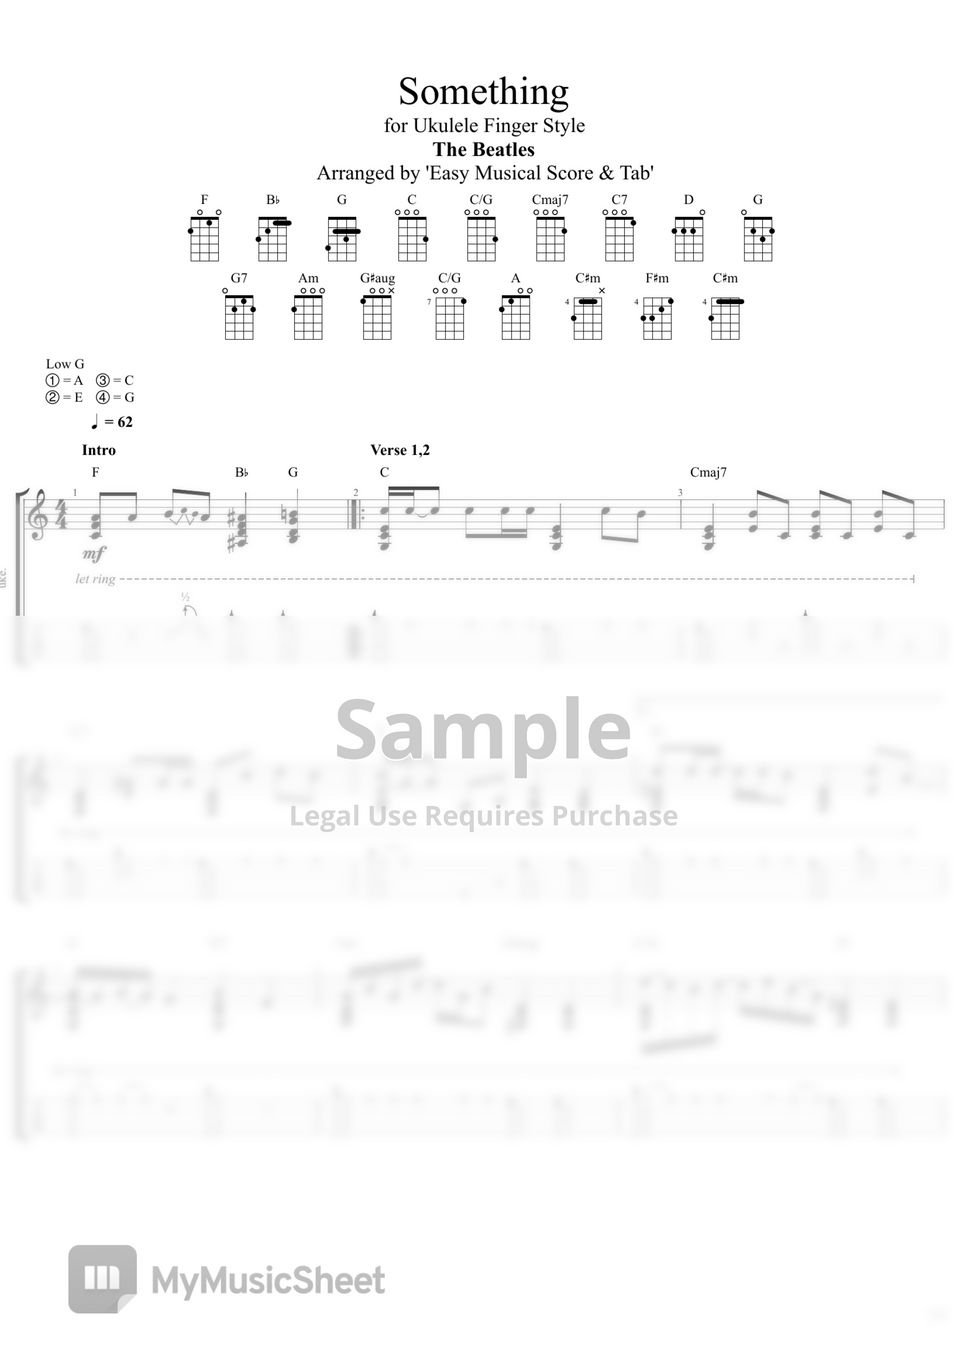 The Beatles - 'Something' Tab for Ukulele Fingerstyle (for 'Low G tuning') by "Easy Musical Score & Tab"